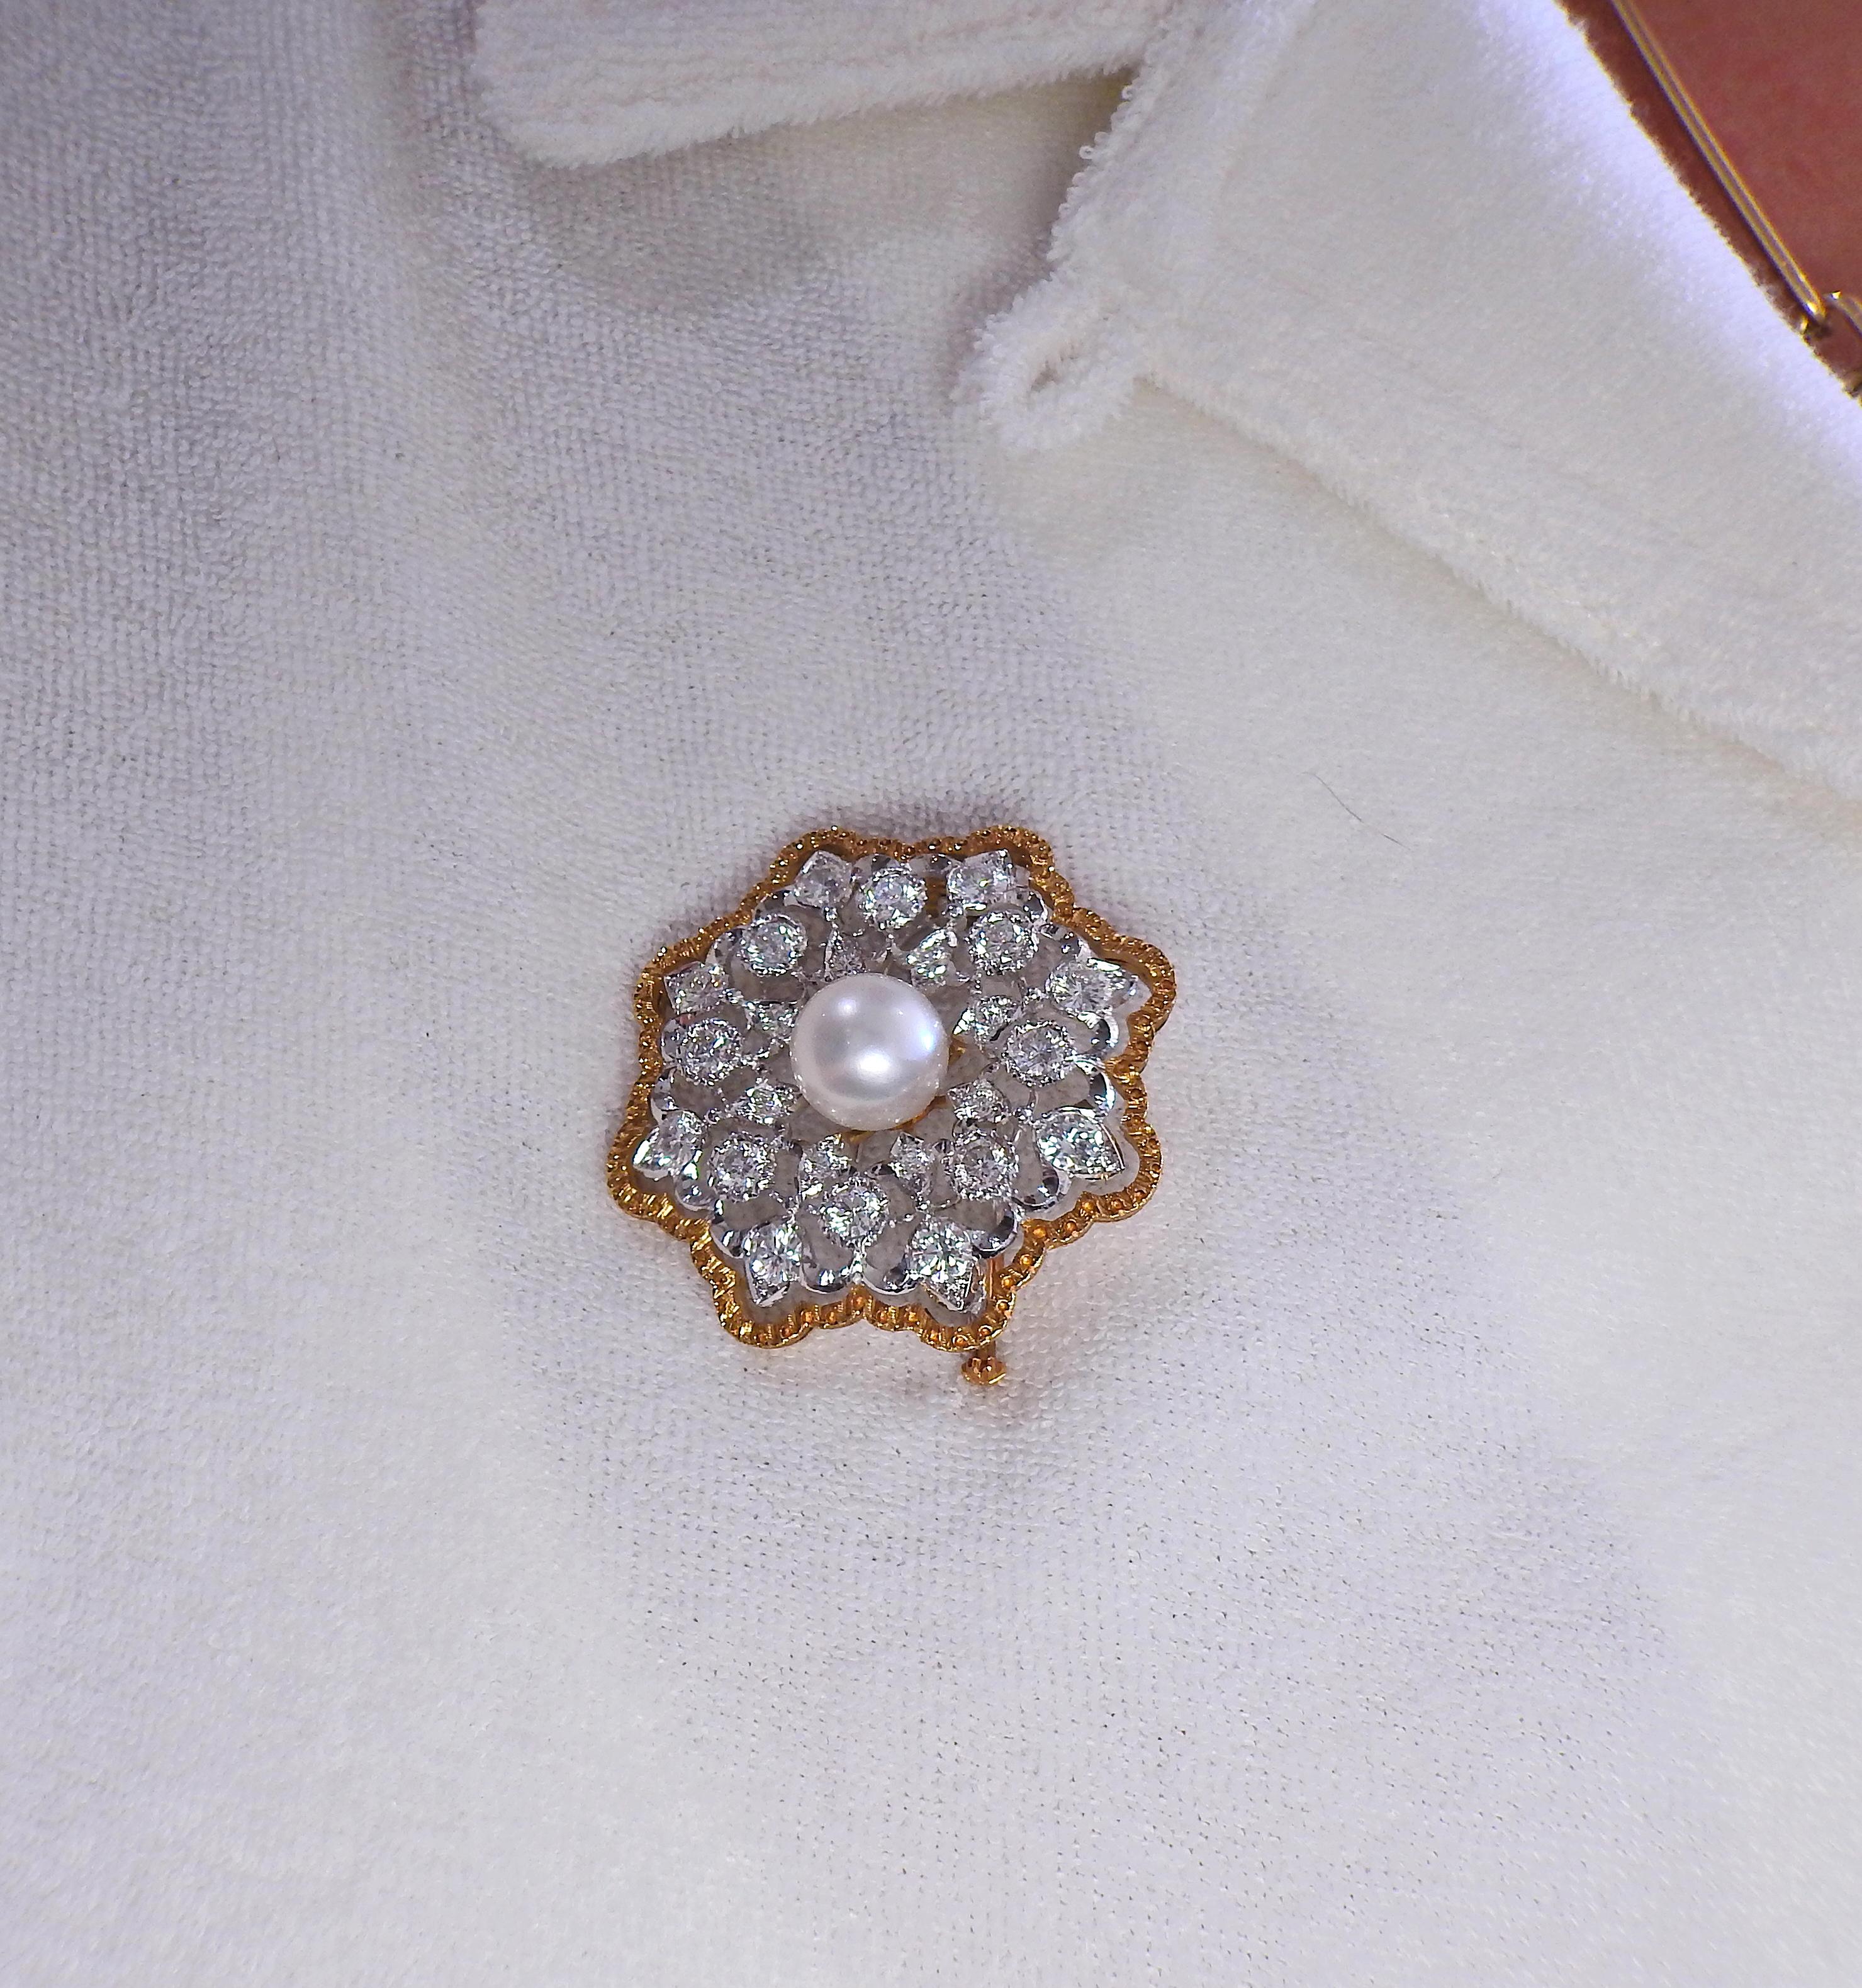 Buccellati Pearl Diamond Gold Brooch In Excellent Condition For Sale In Lambertville, NJ